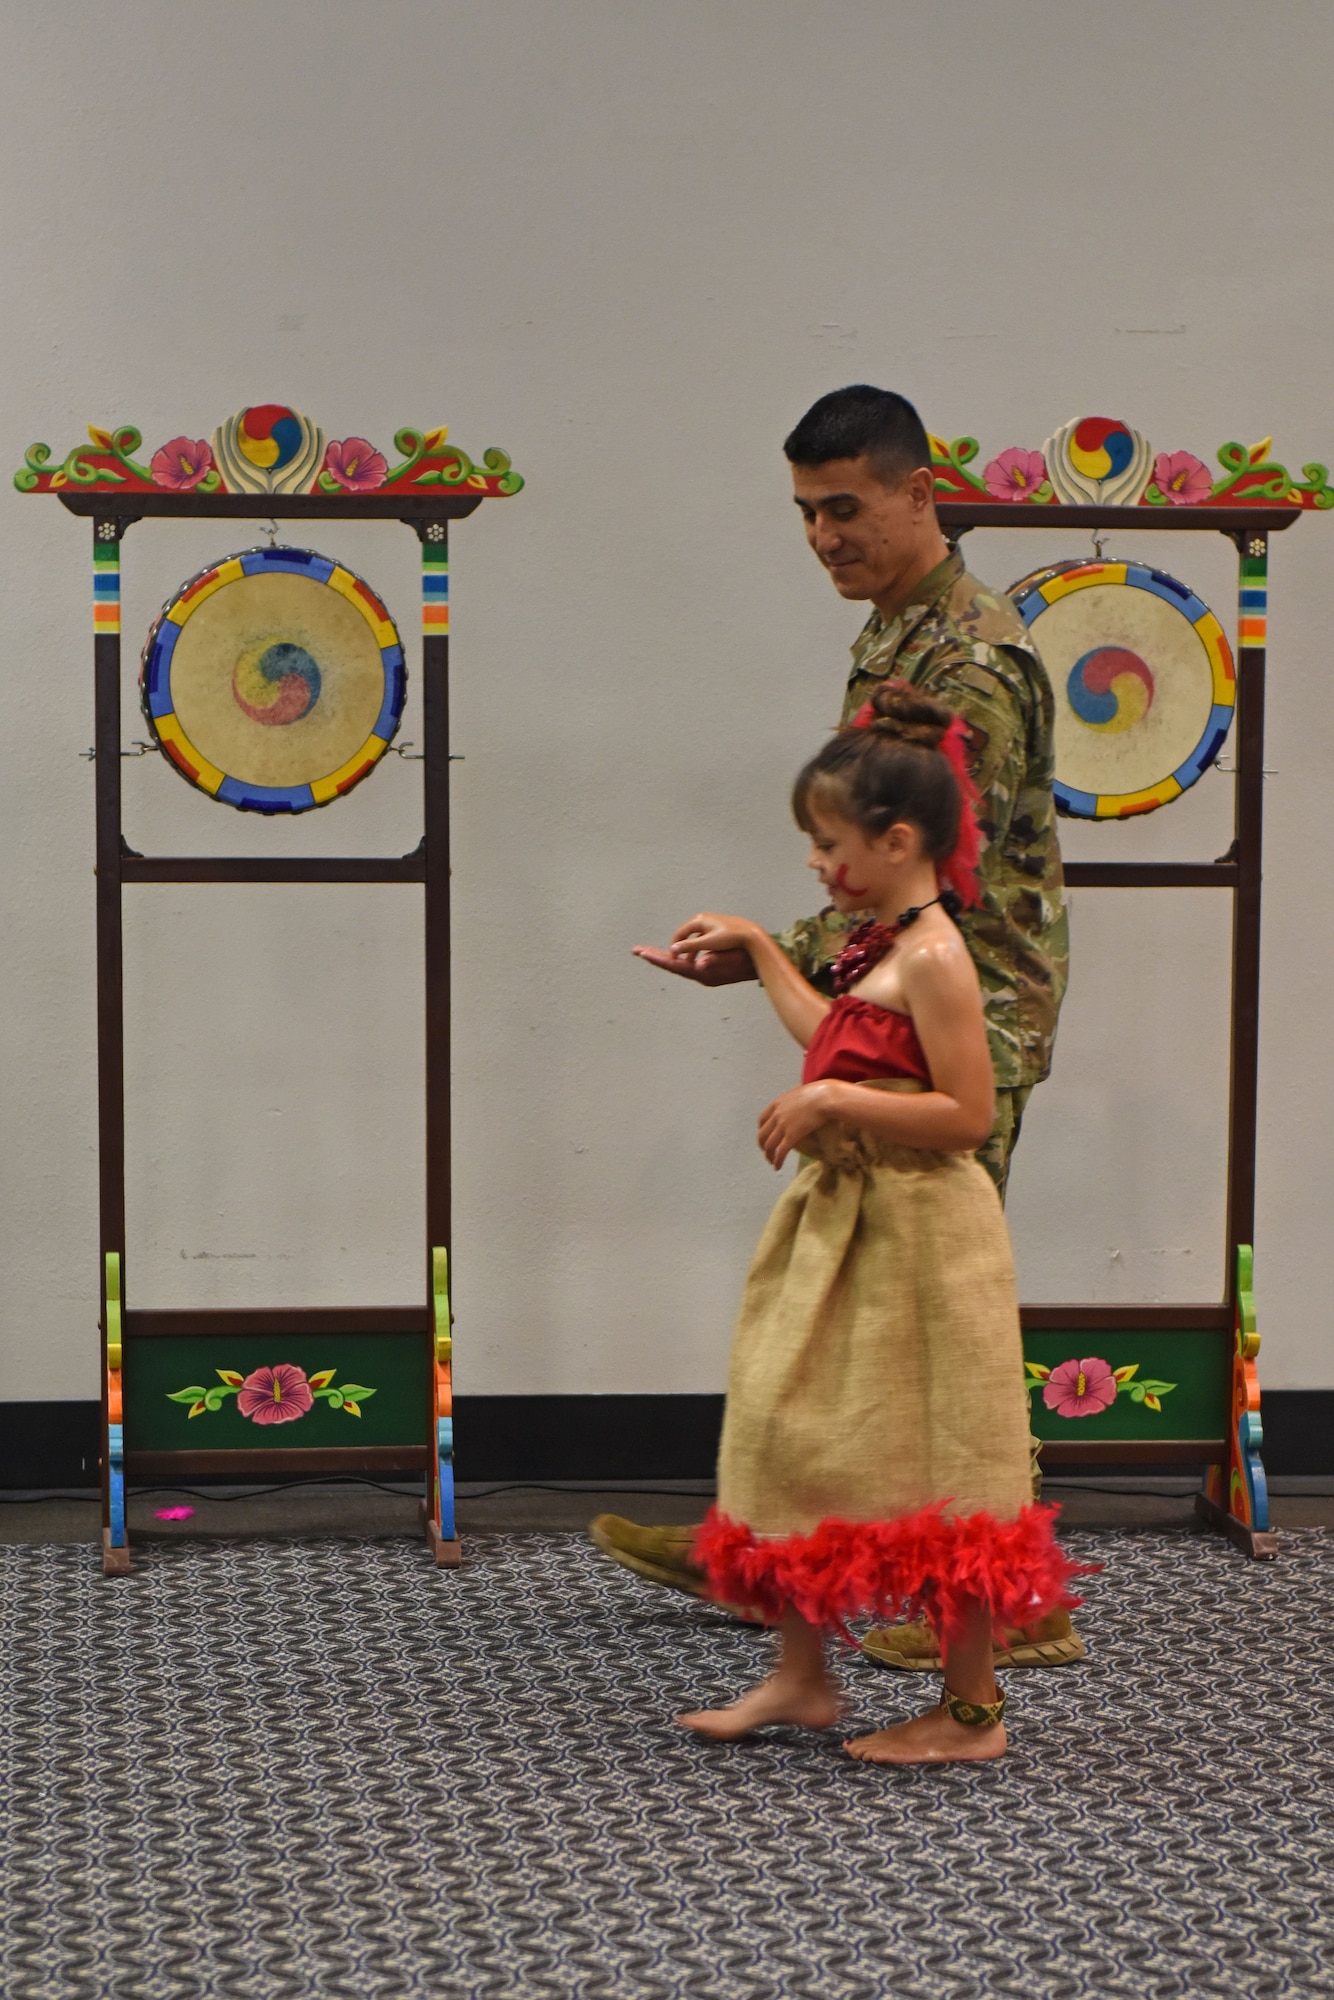 U.S. Air Force Col. Ricky Mills, 17th Training Wing commander, leads his daughter onto the dance floor to perform the Samoan dance called the “Taualuga” which symbolizes the conclusion of a monumental task and the beautifying final touches involved during the Asian American Pacific Islander Heritage Month Culture Event at the event center on Goodfellow Air Force Base, Texas, May 22, 2019. This dance is sacred to the Samoan people and is performed by the son or daughter of a Chief. (U.S. Air Force photo by Senior Airman Seraiah Hines/Released)